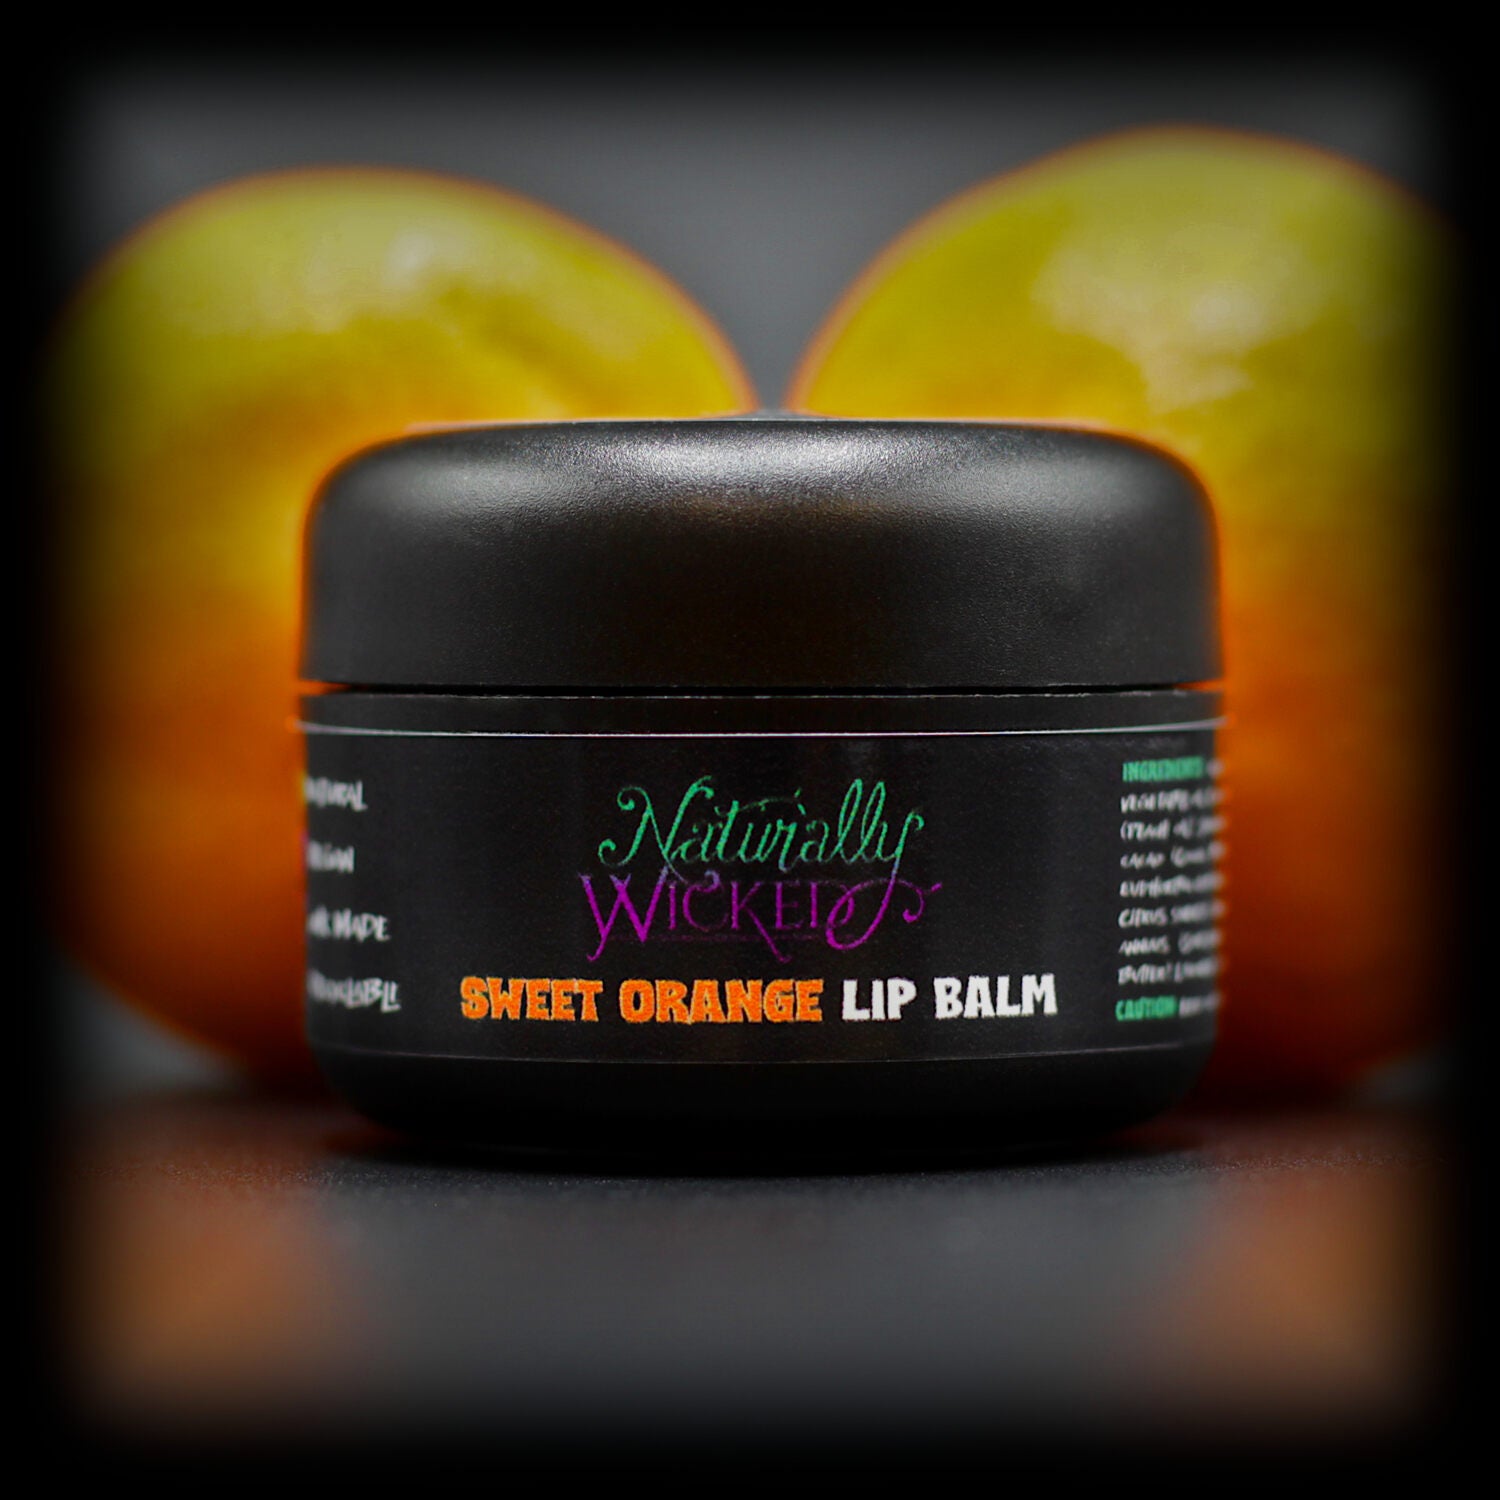 Naturally Wicked Sweet Orange Lip Balm In Front Of Two Juicy Orange Fruits